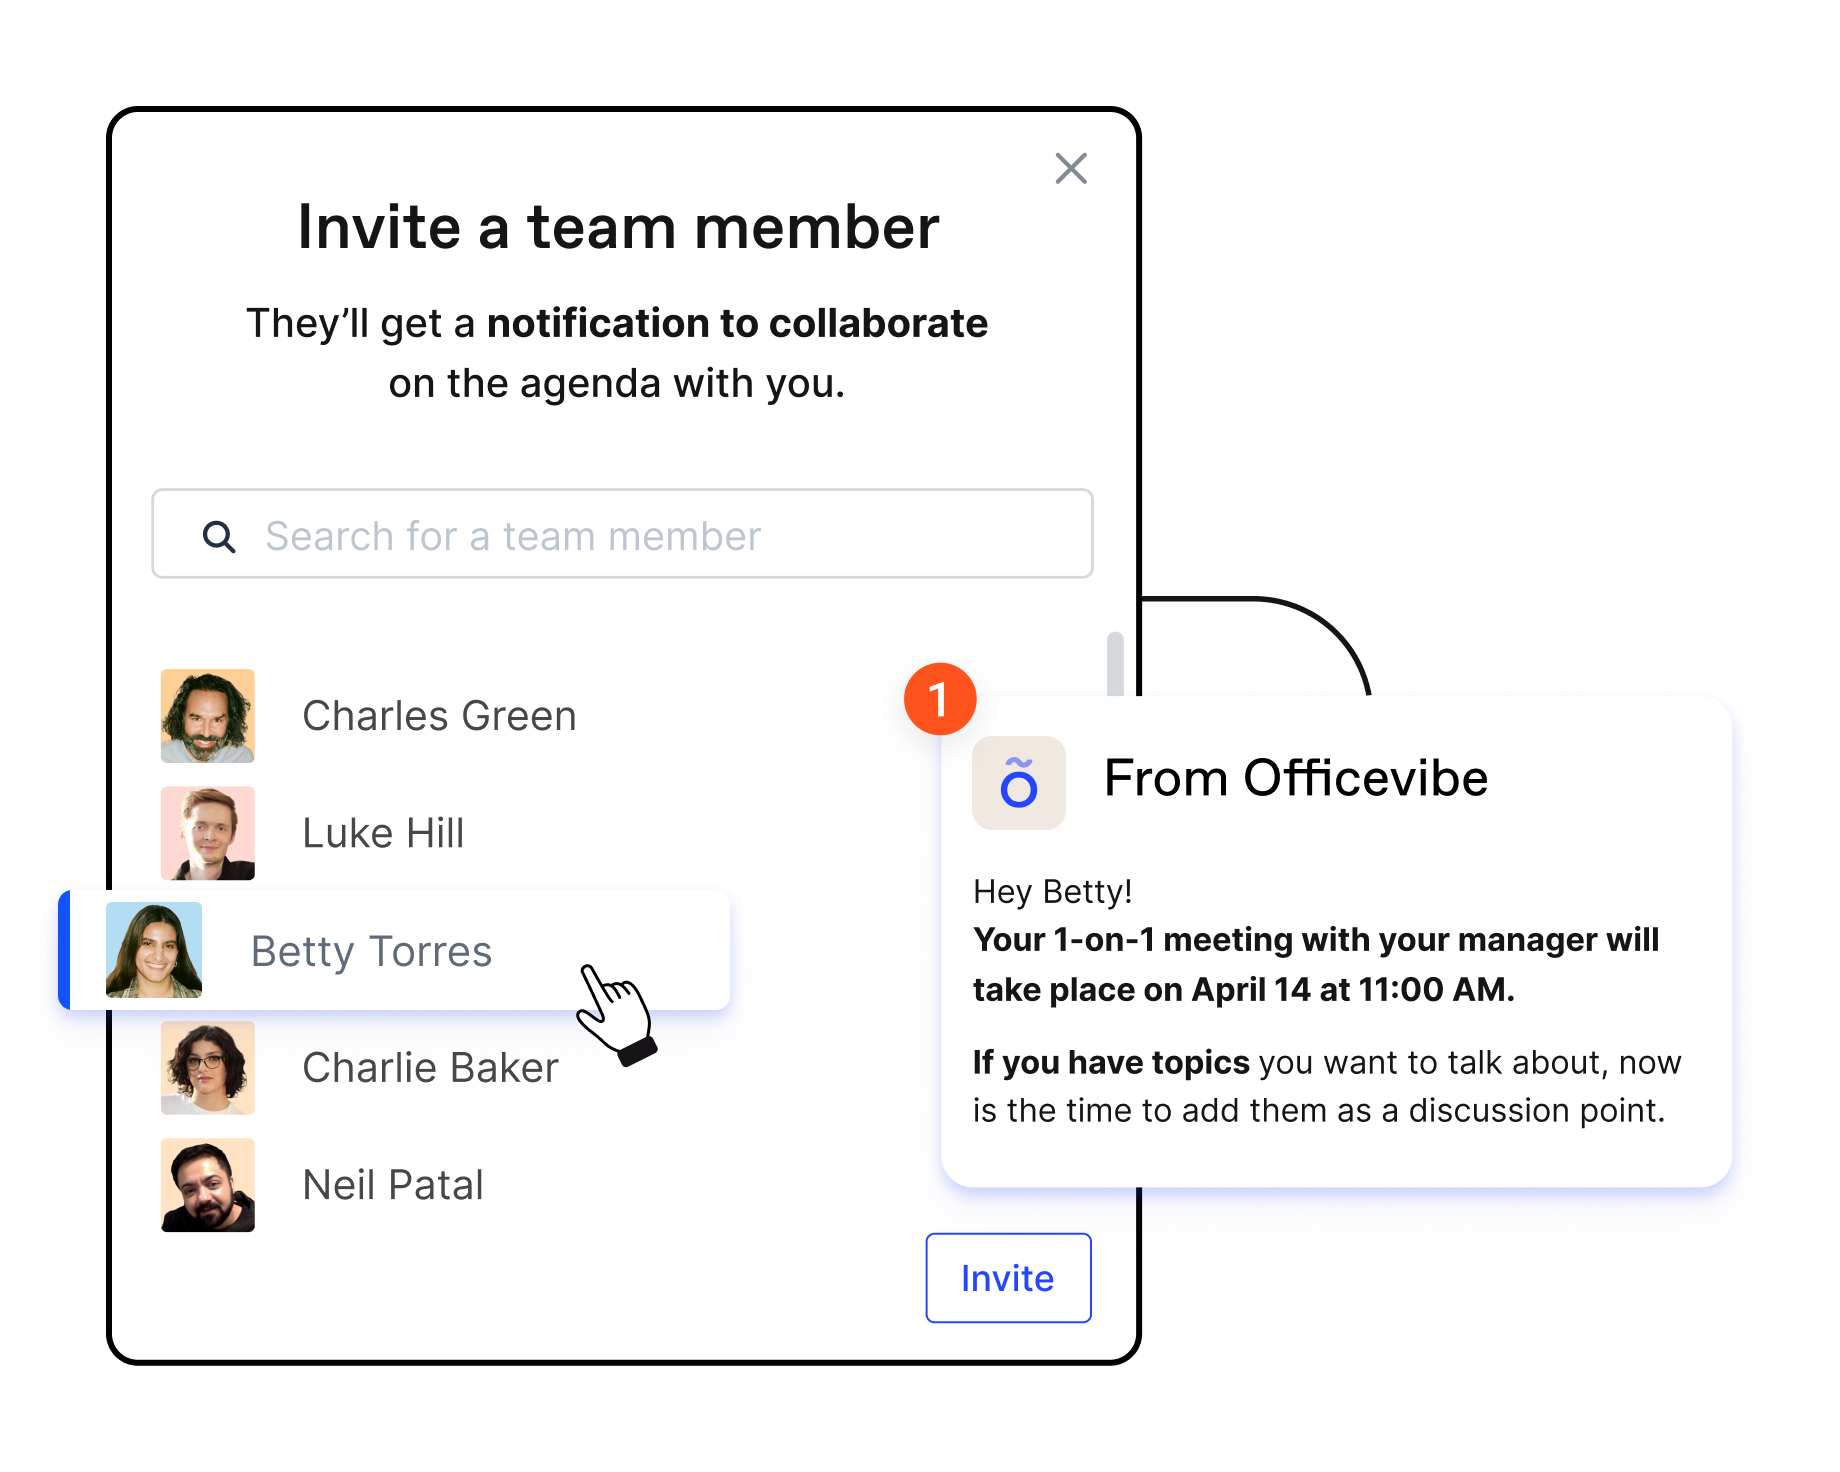 Invitation of a team member to a one-on-one meeting with the Officevibe notification to collaborate on the agenda.